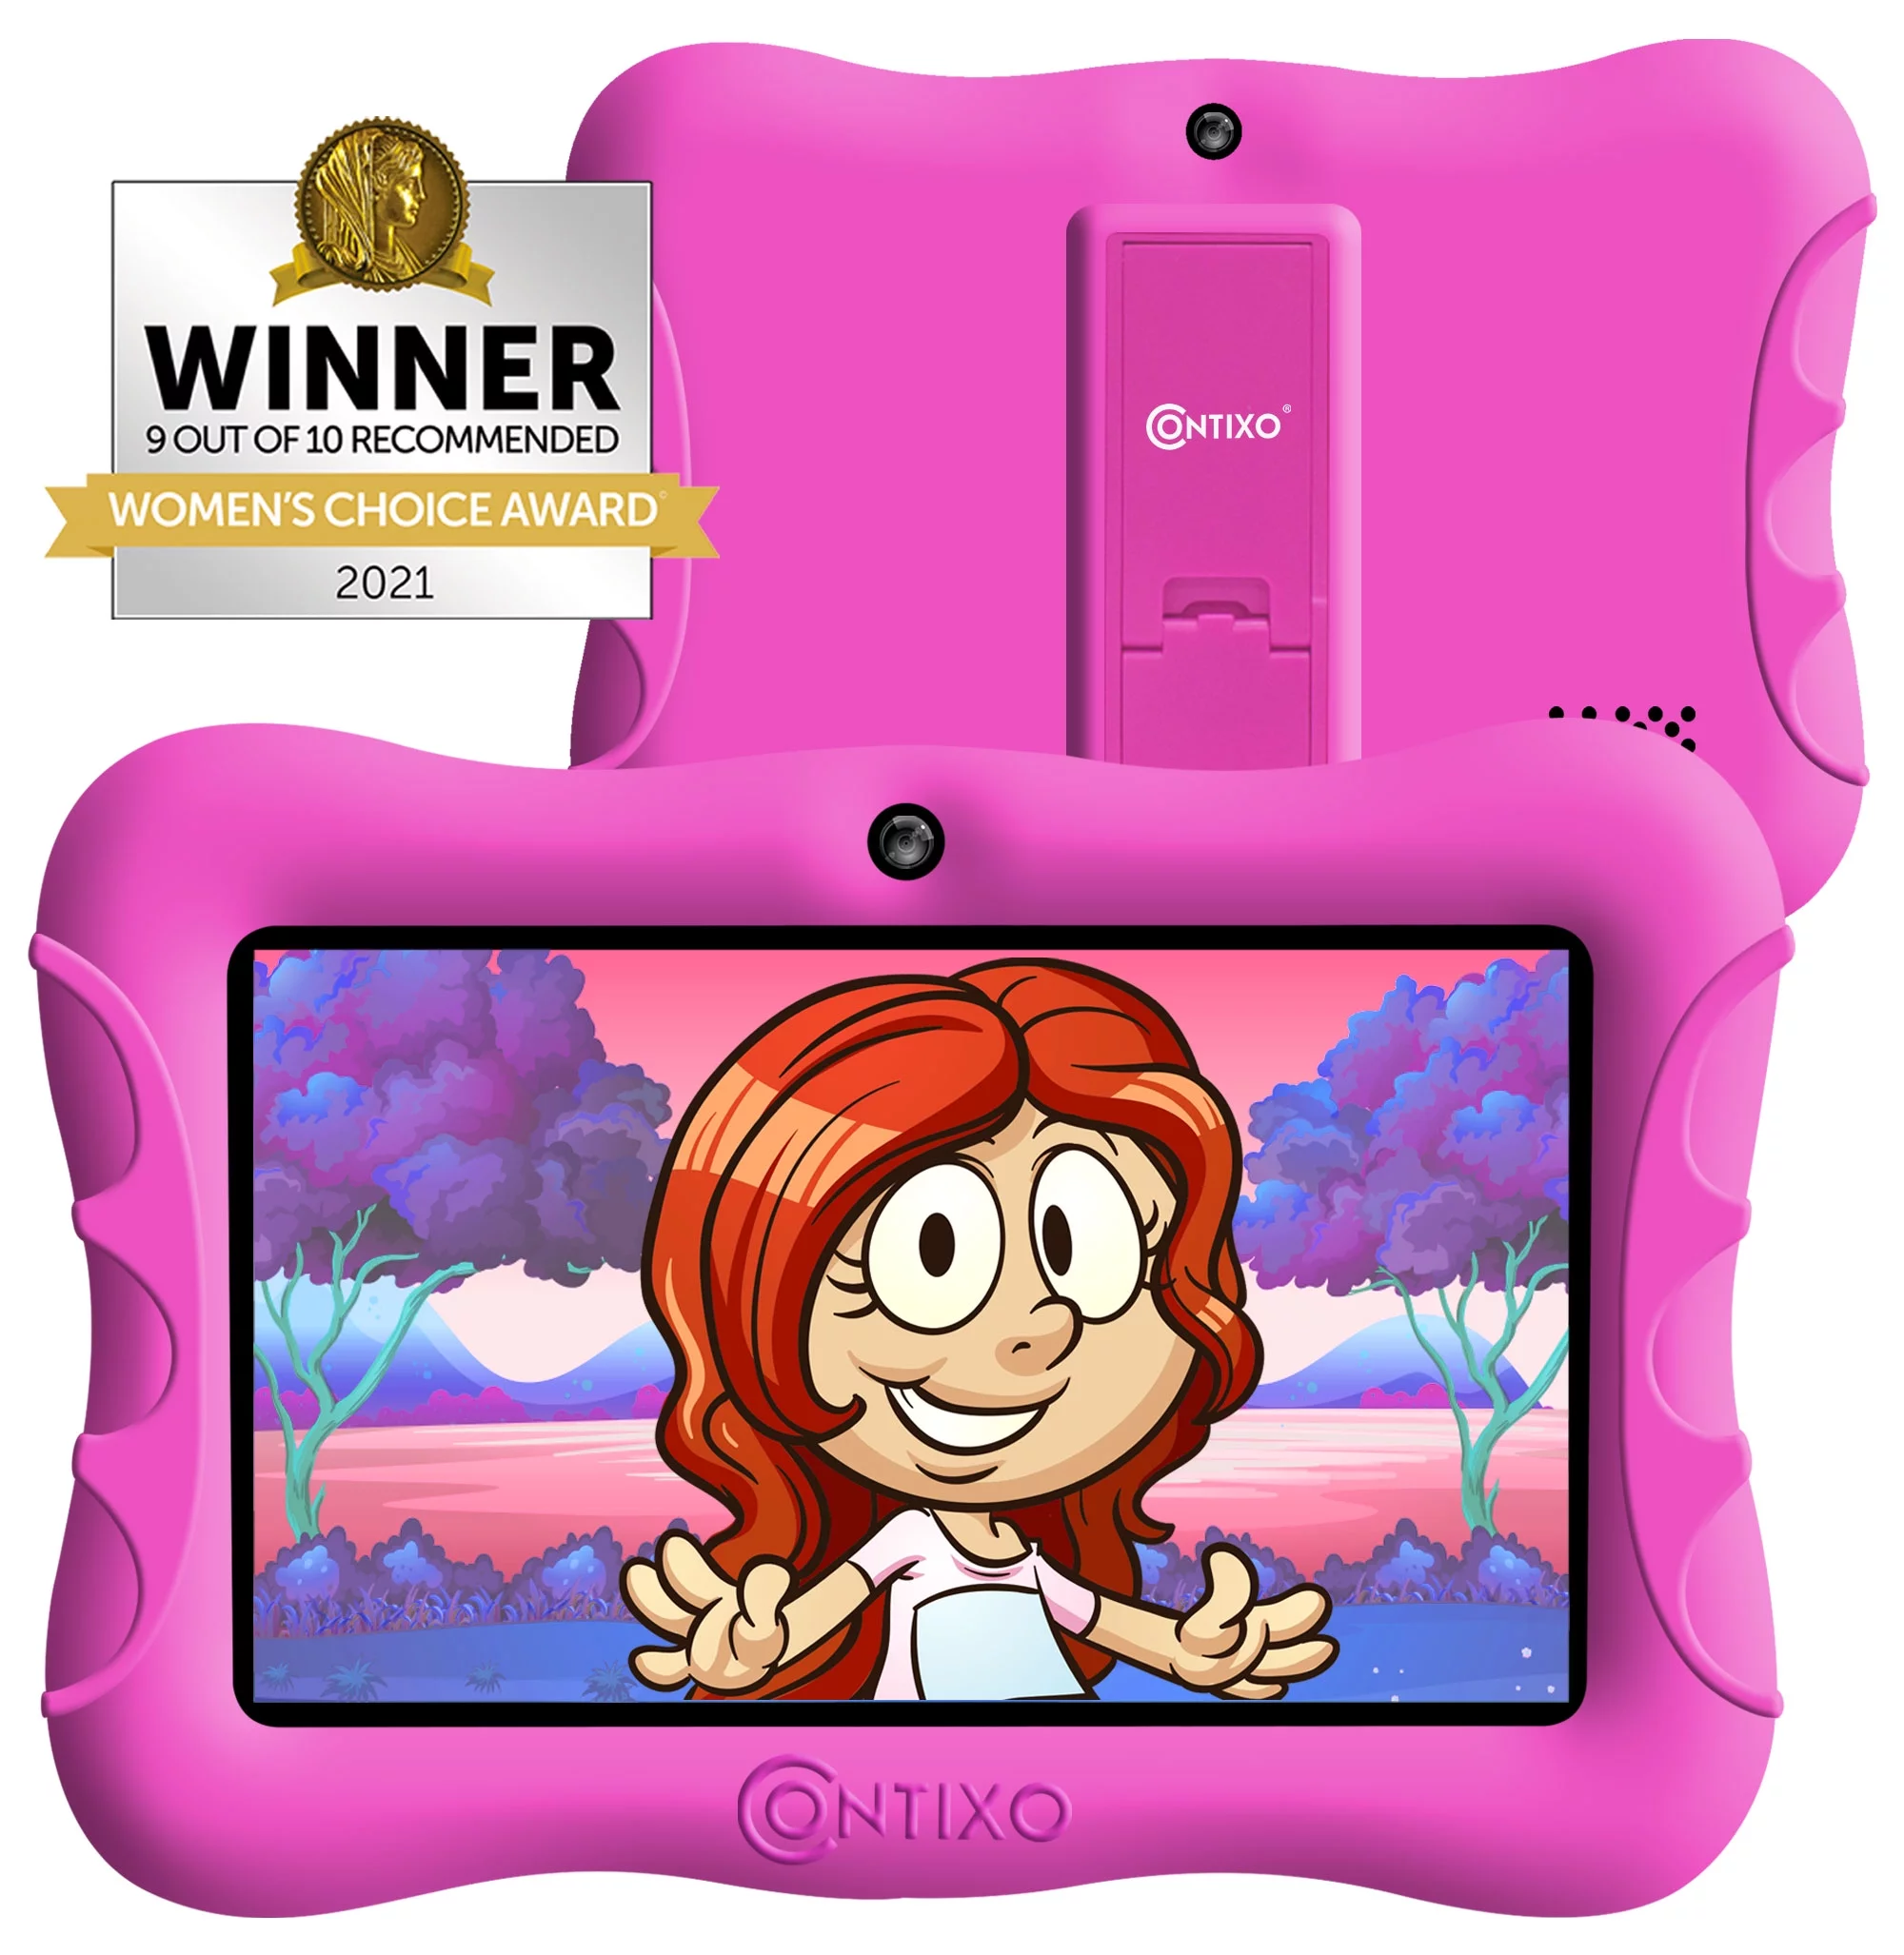 Contixo 7&quot; Kids Tablet V8-3 Android with WiFi Camera 16GB Learning Tablet for Toddlers Children Kids Place Parental Control Pre installed 20+ Education Apps w/Kid-Proof Protective Case (Pink)